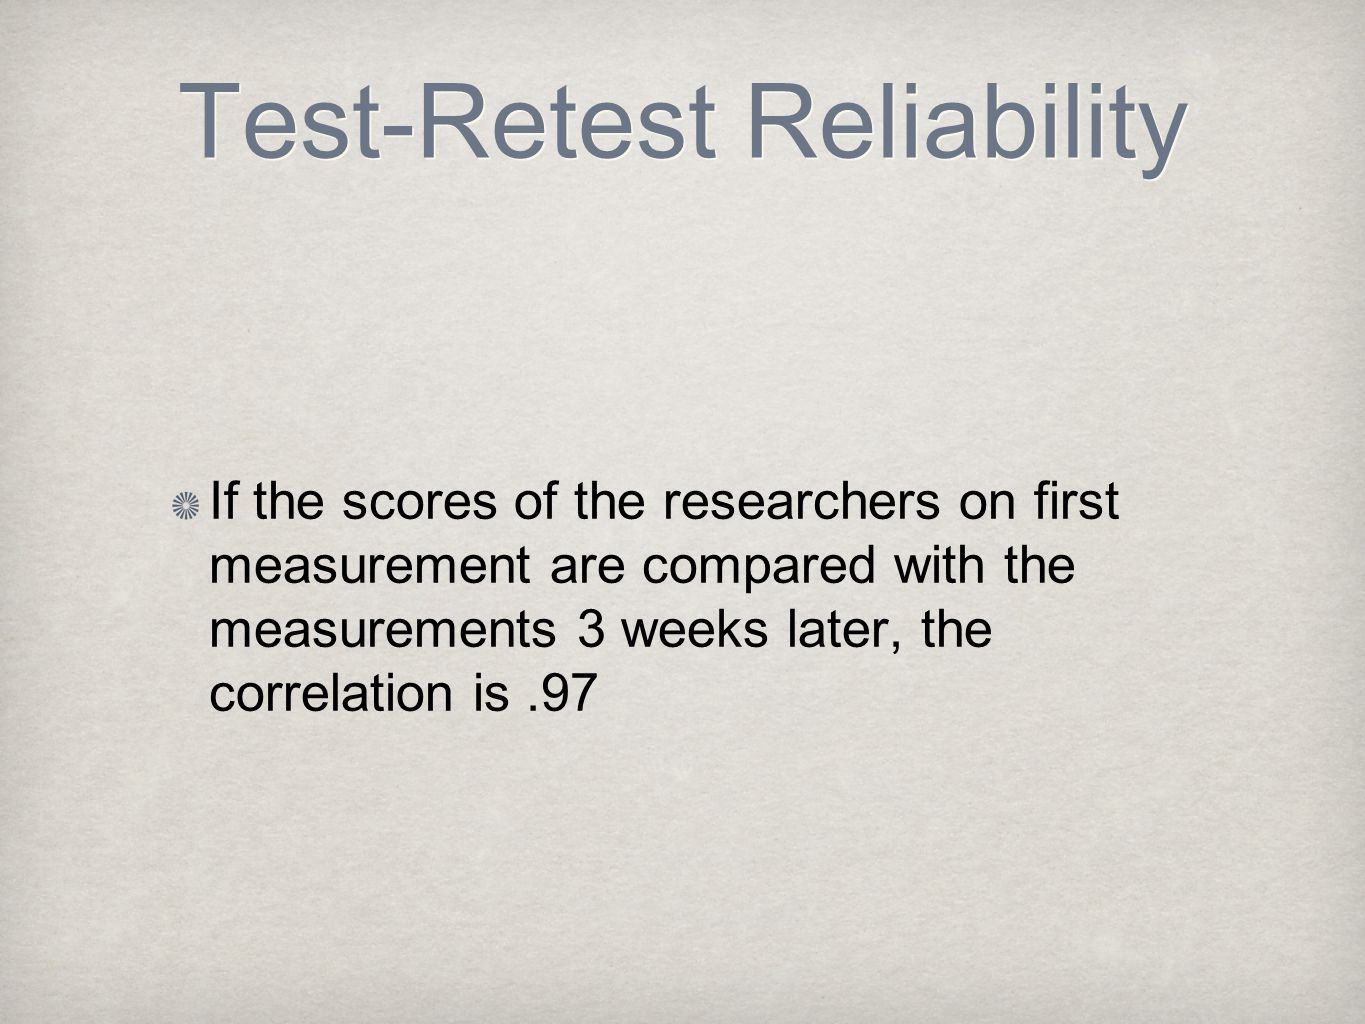 Test-Retest Reliability If the scores of the researchers on first measurement are compared with the measurements 3 weeks later, the correlation is.97